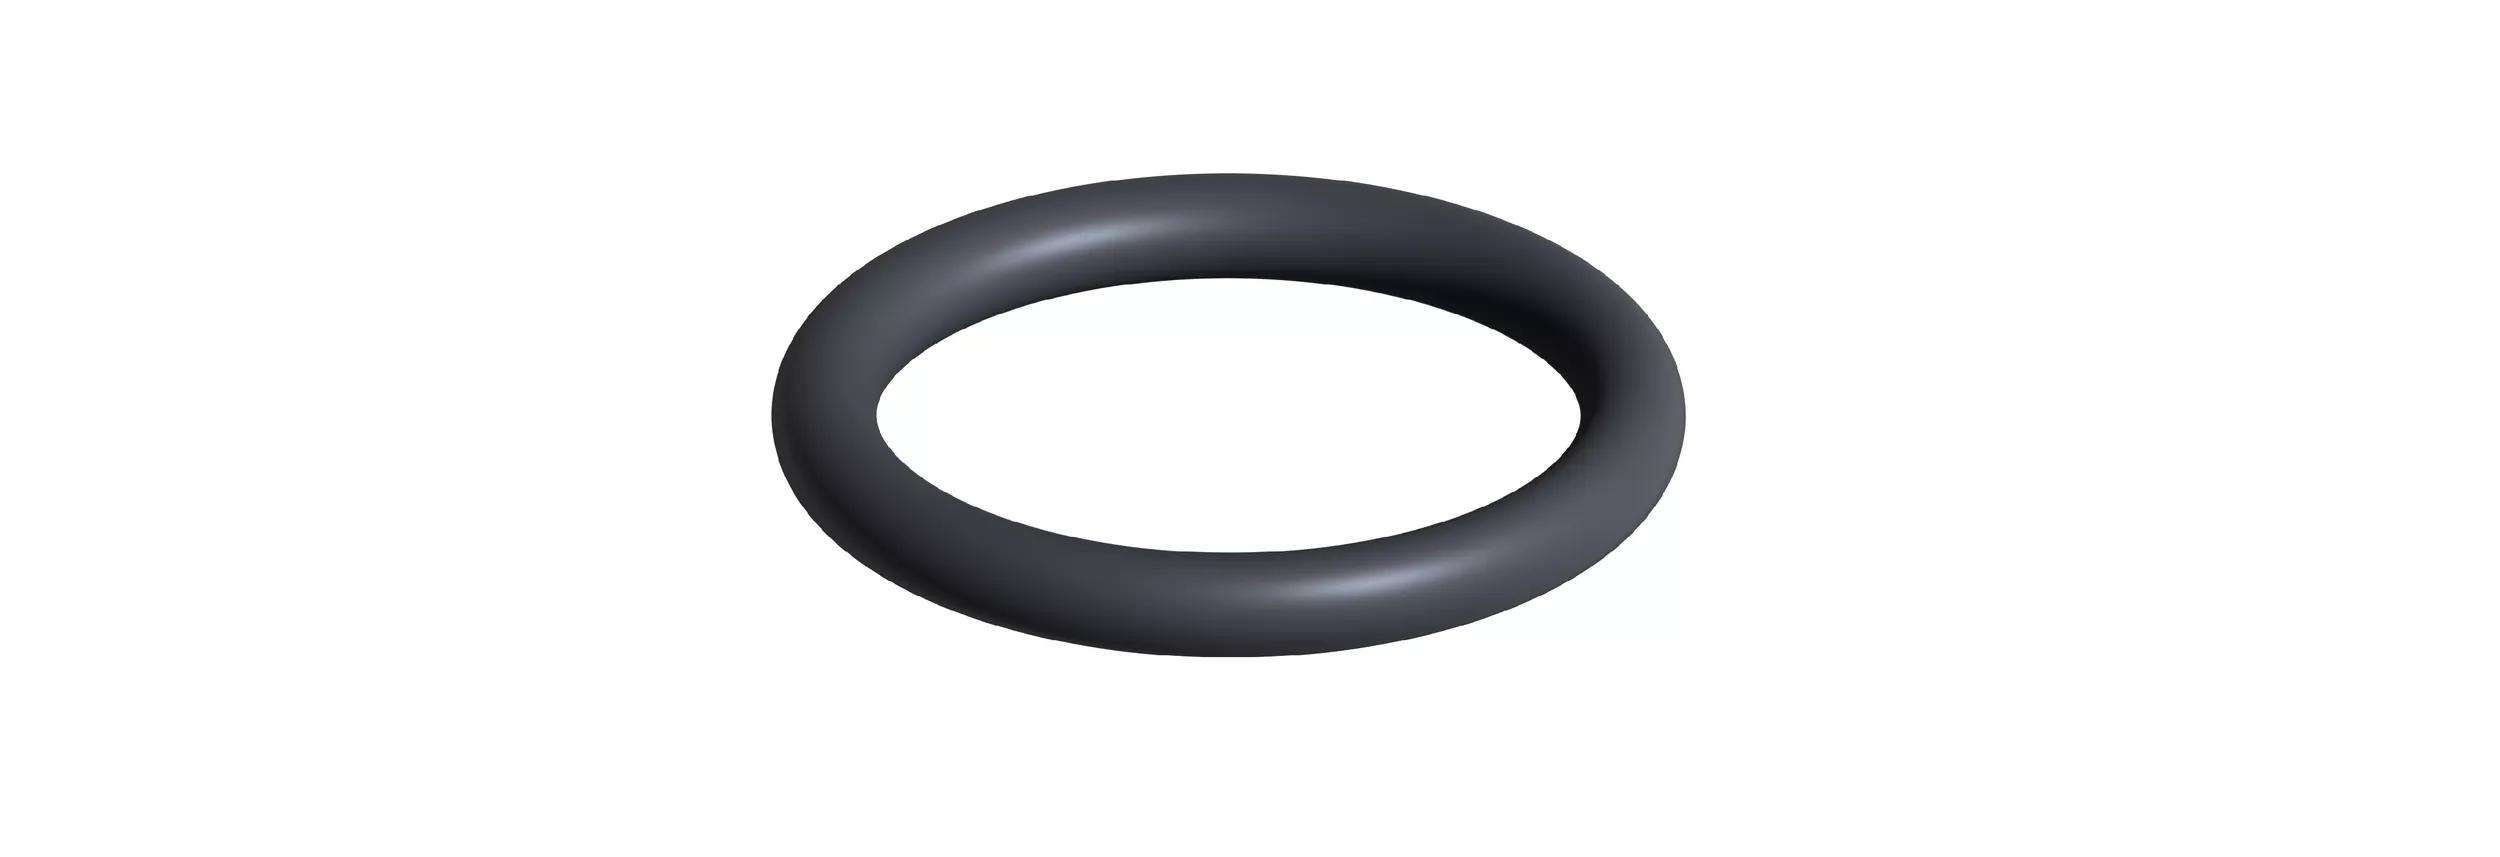 A guide to o-ring seals